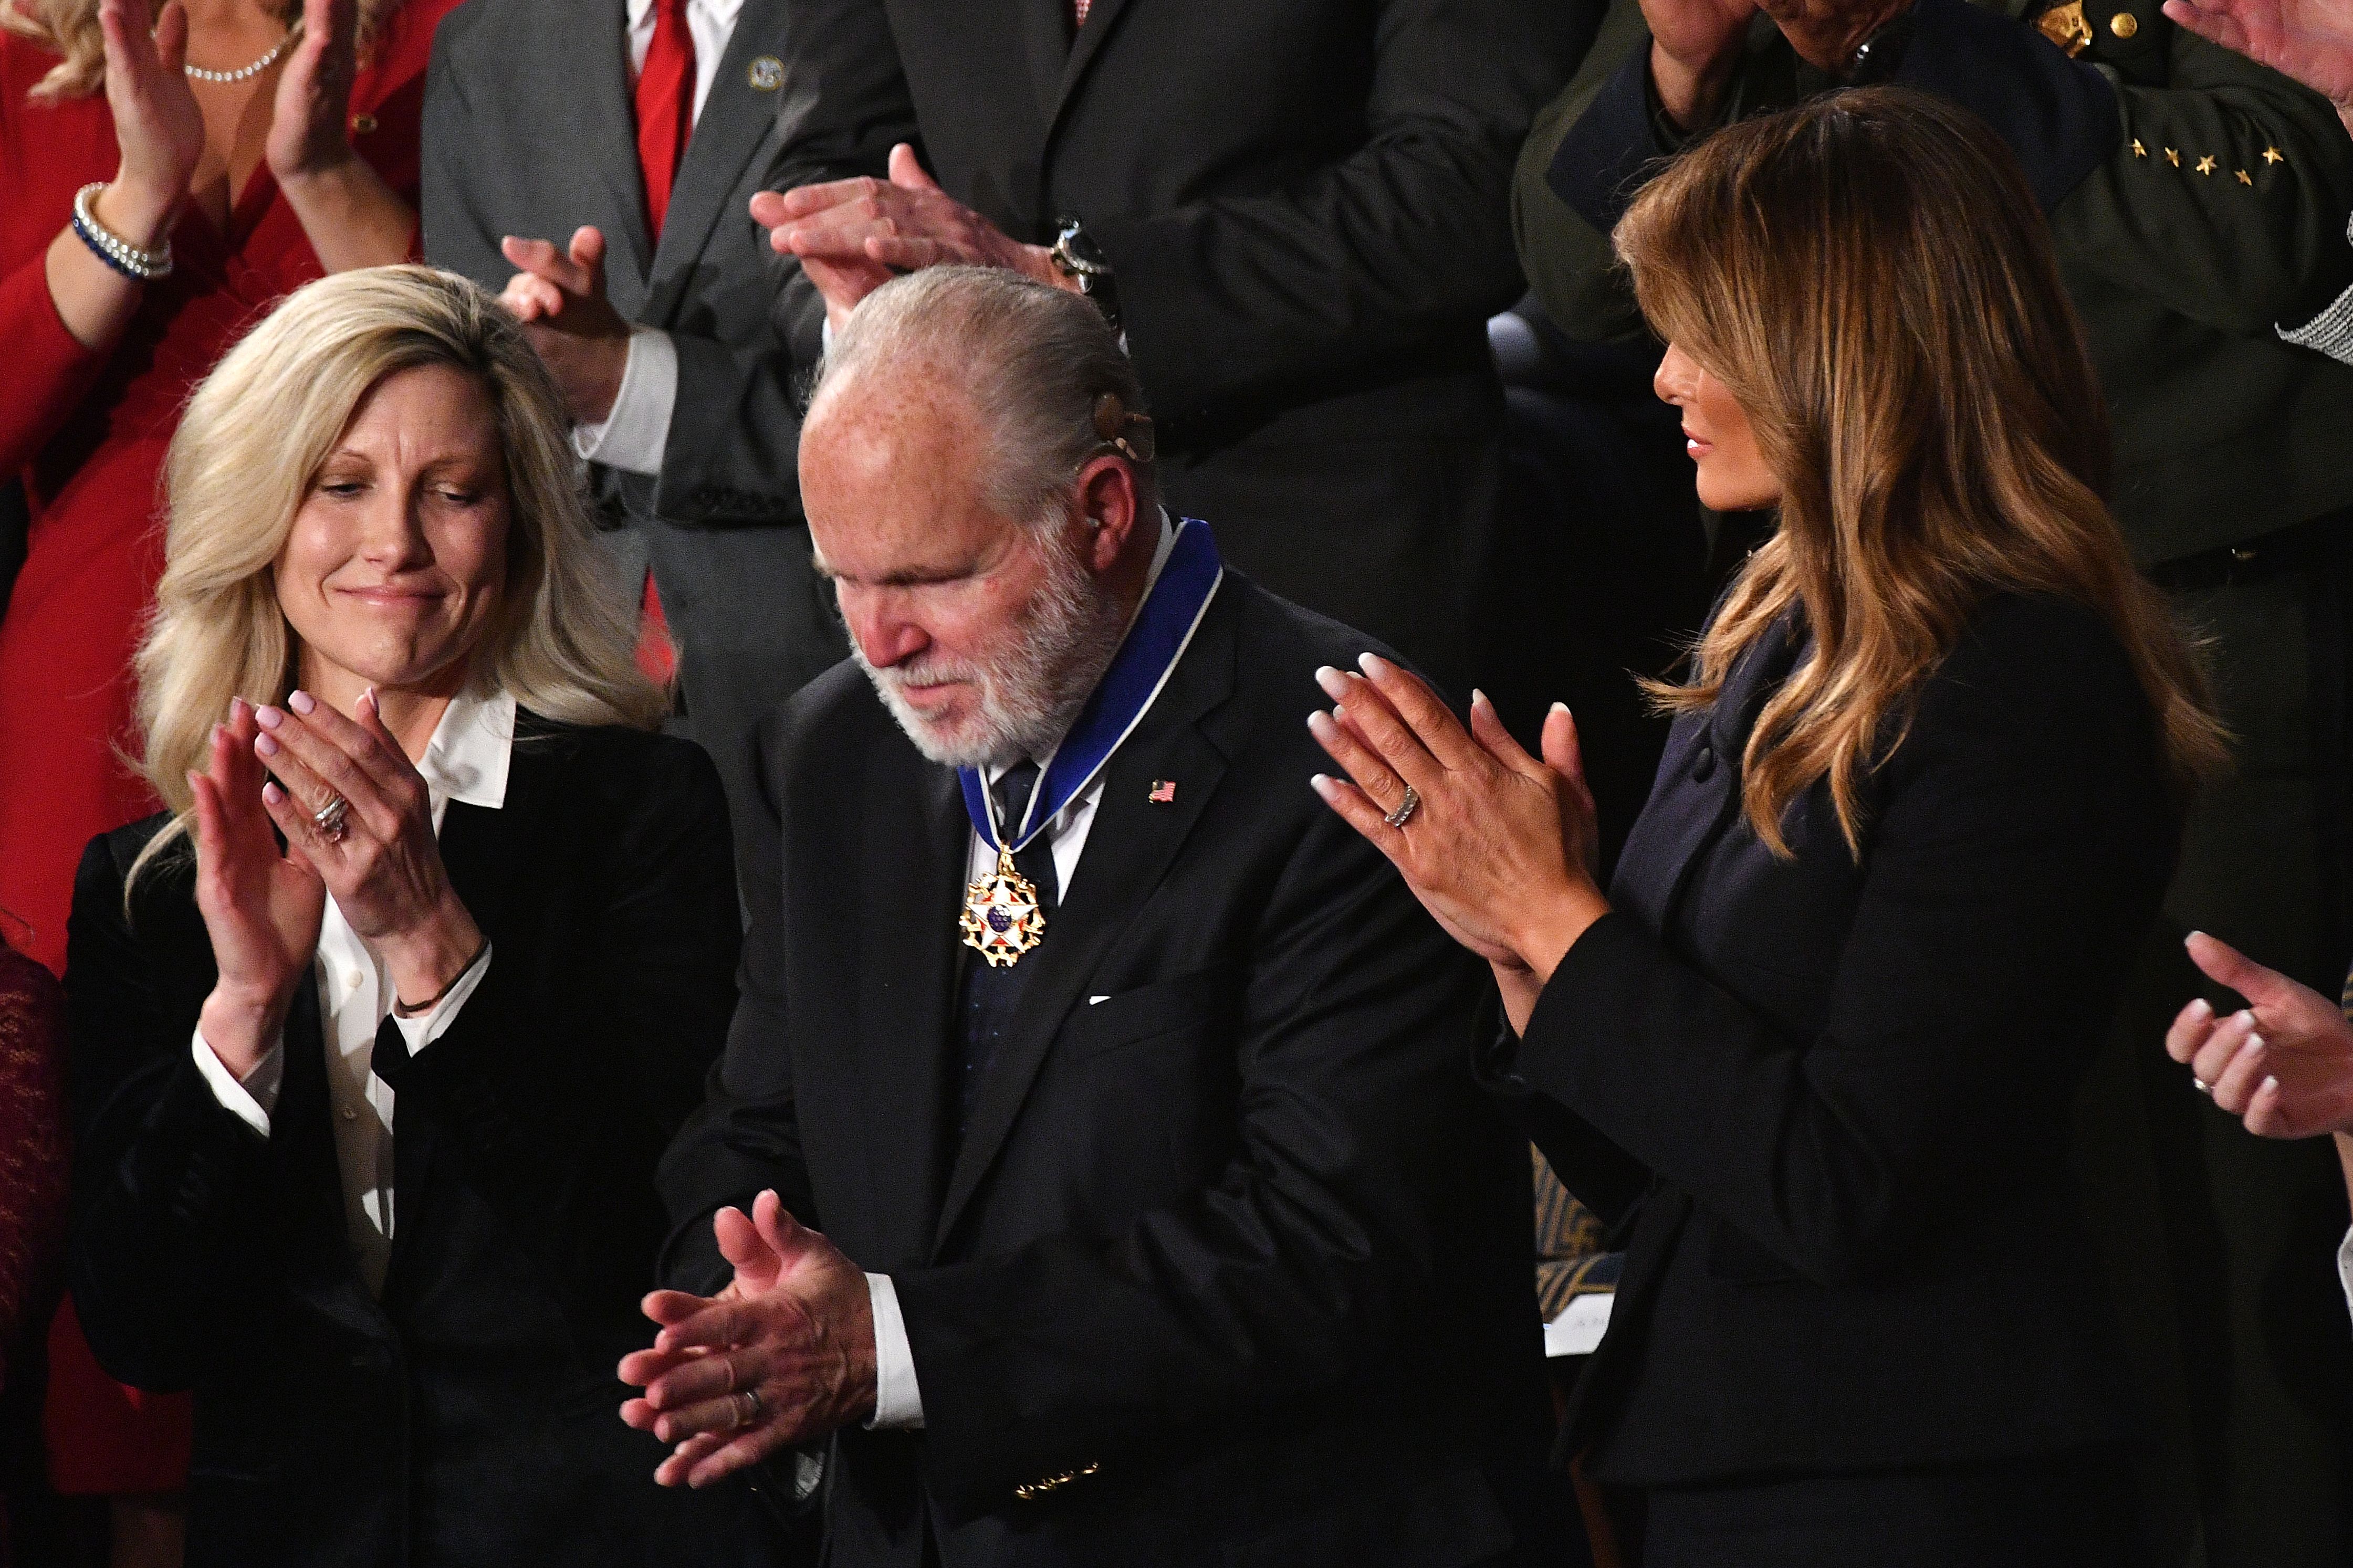 Radio personality Rush Limbaugh bows after being awarded the Medal of Freedom by First Lady Melania Trump after being acknowledged by US President Donald Trump as he delivers the State of the Union address at the US Capitol in Washington, DC, on February 4, 2020. (MANDEL NGAN/AFP via Getty Images)